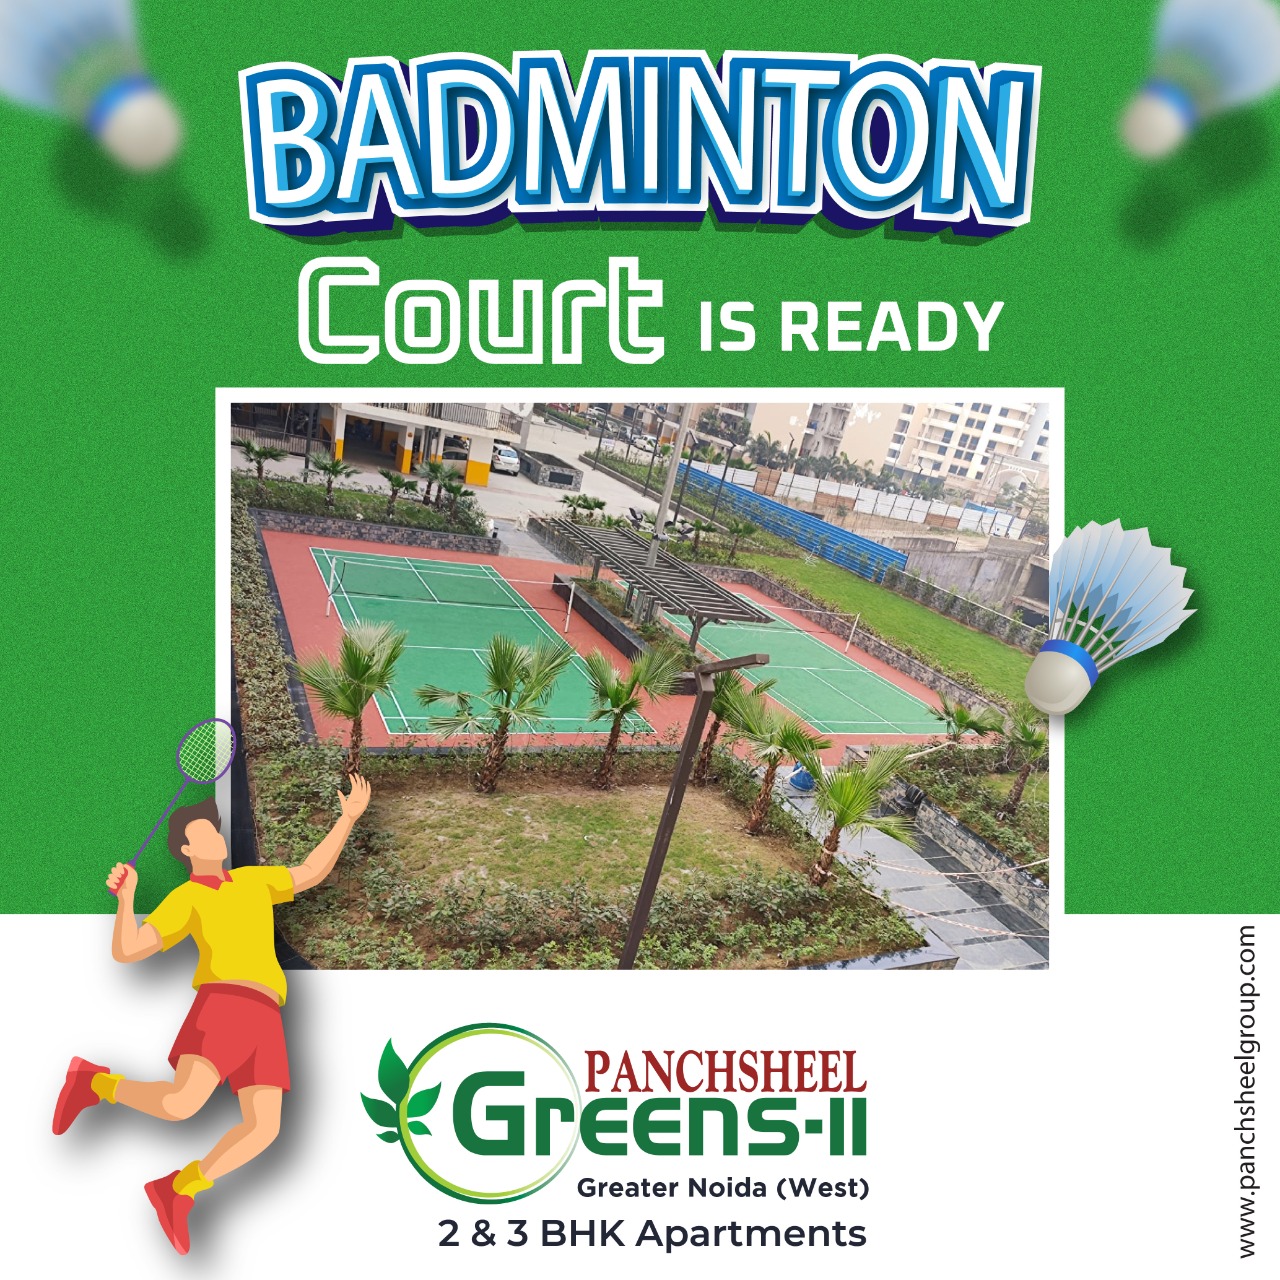 Badminton court is ready for resident at Panchsheel Greens 2, Greater Noida